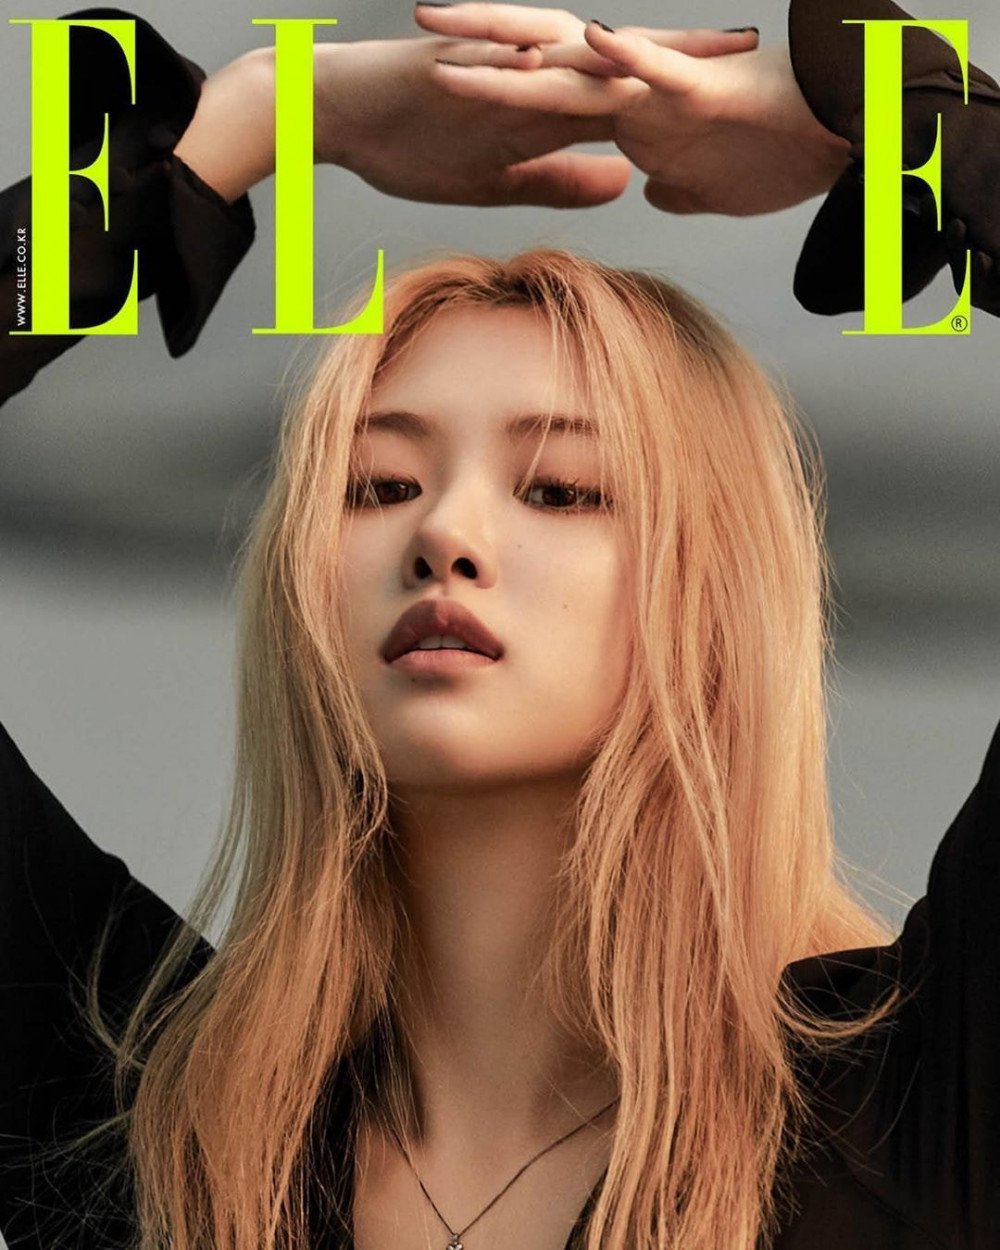 blackpink-rose-interests-fans-by-her-charm-as-the-model-on-the-july-cover-of-elle-1